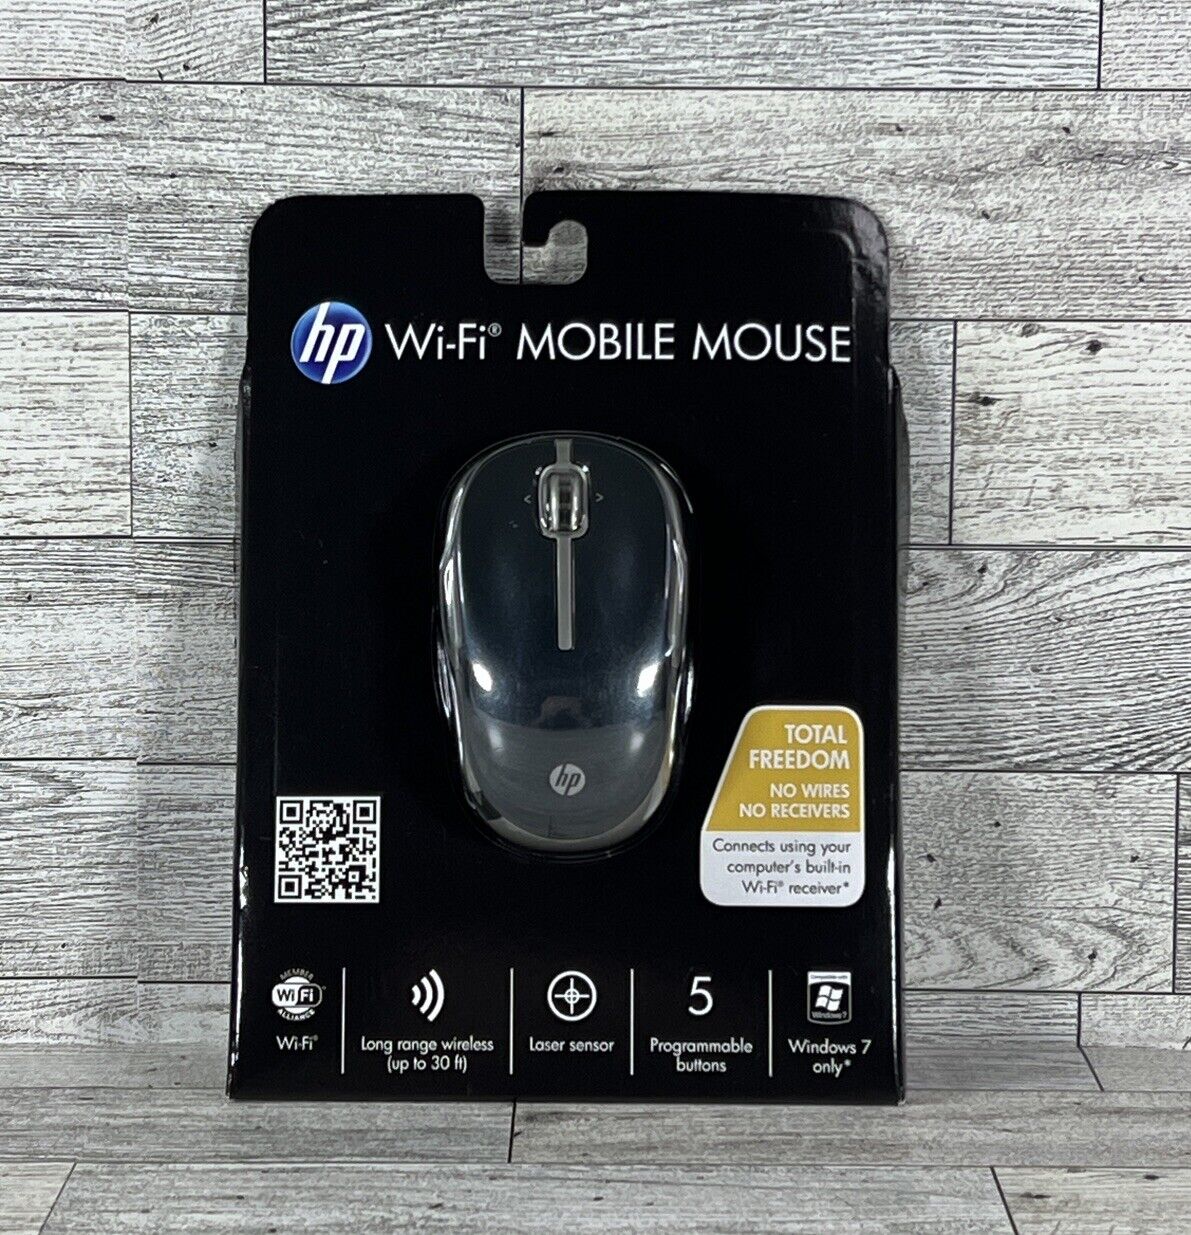 Genuine HP Wi-Fi Wireless Mobile Mouse Black & Silver Windows 7 Only New Sealed